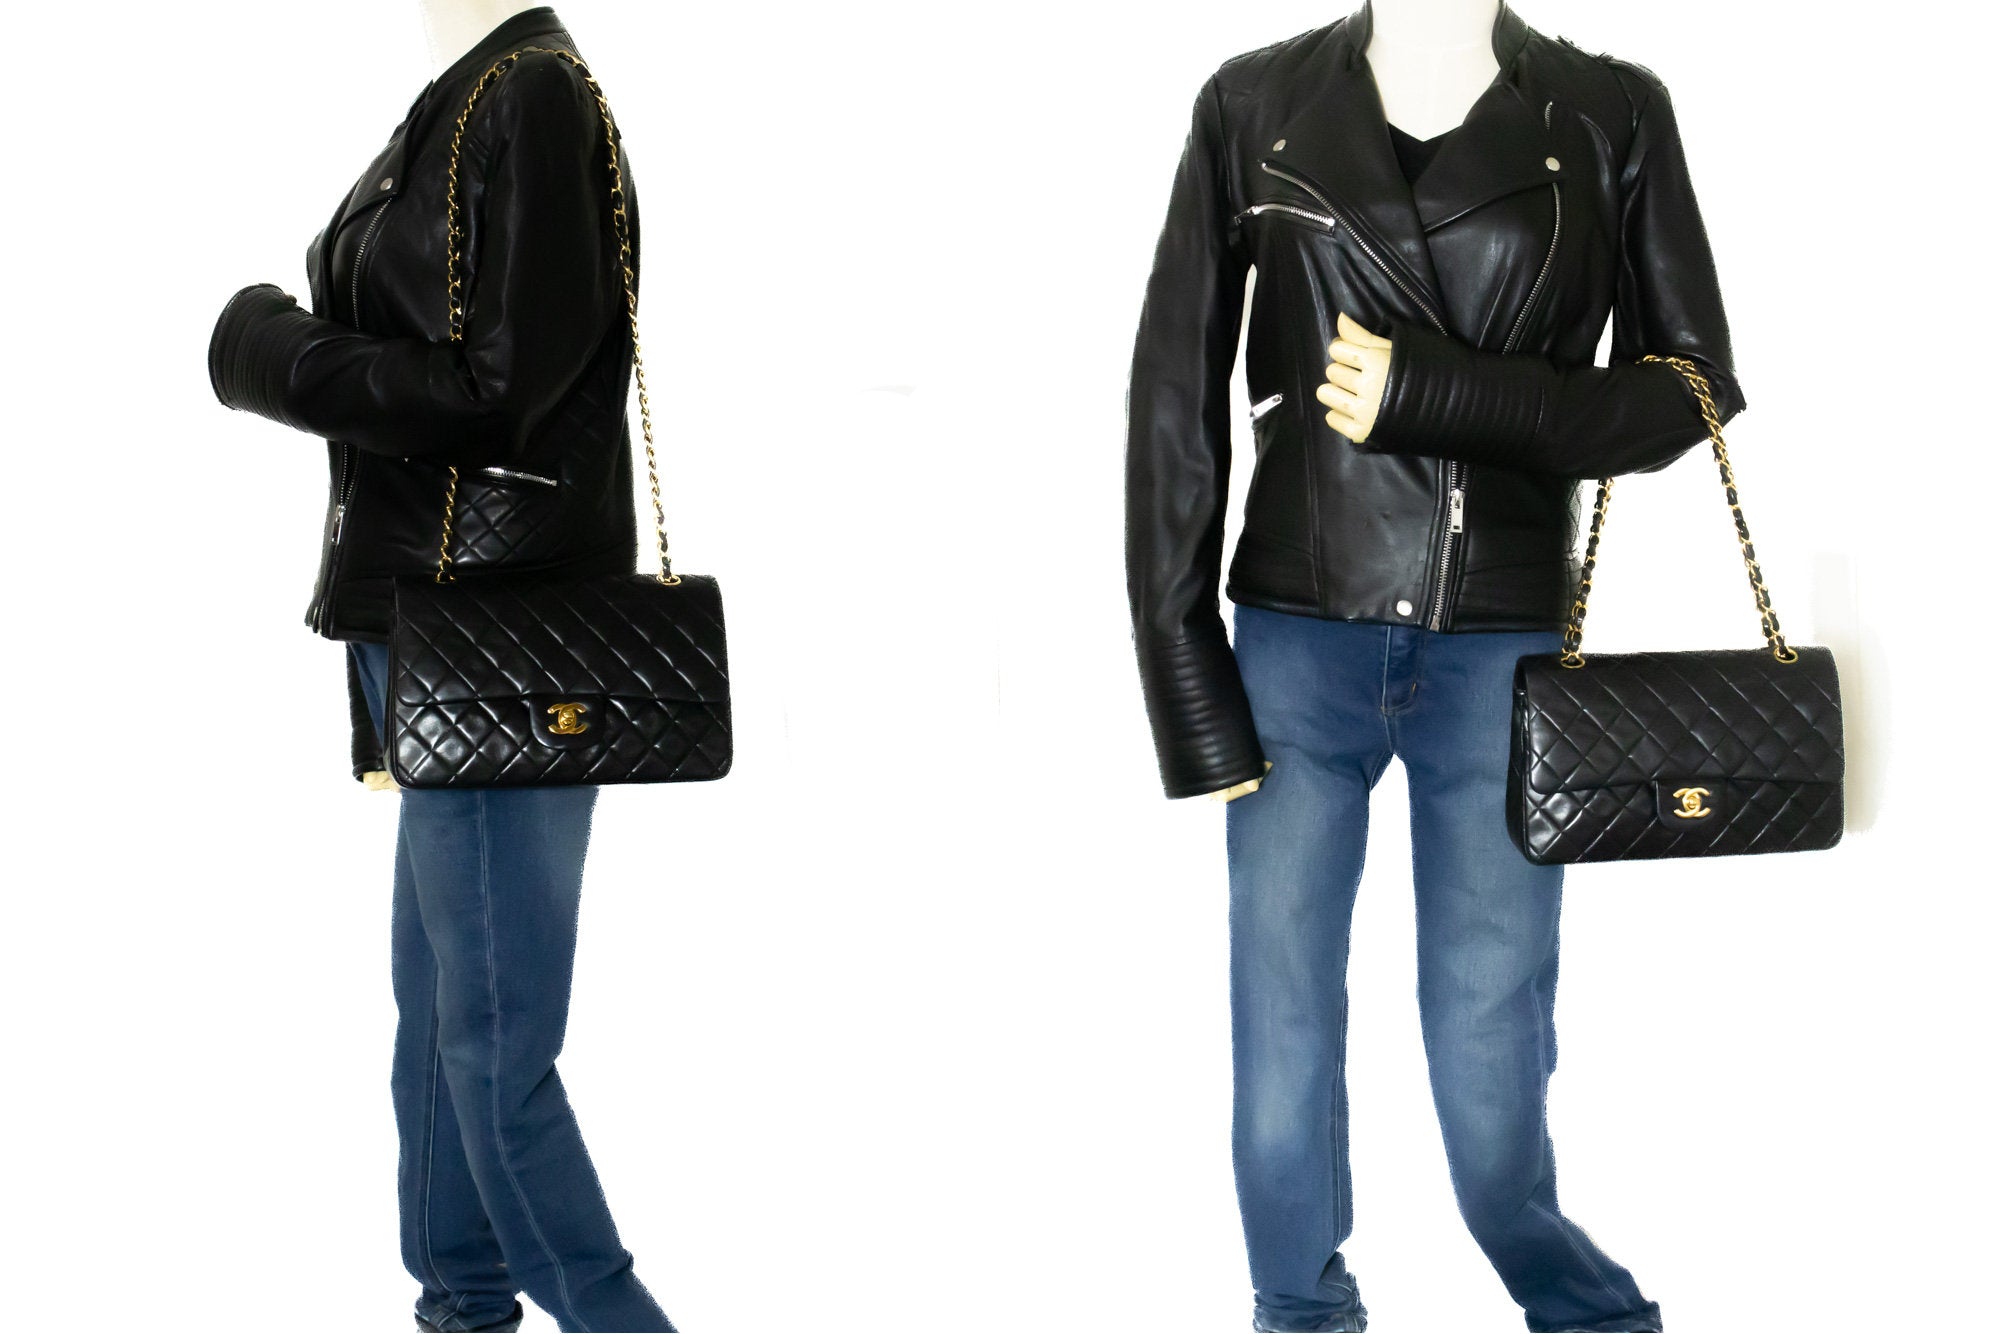 VIDEO: Comparing the CHANEL Small Vs. Jumbo Flap Bag (pros & cons) —  WOAHSTYLE